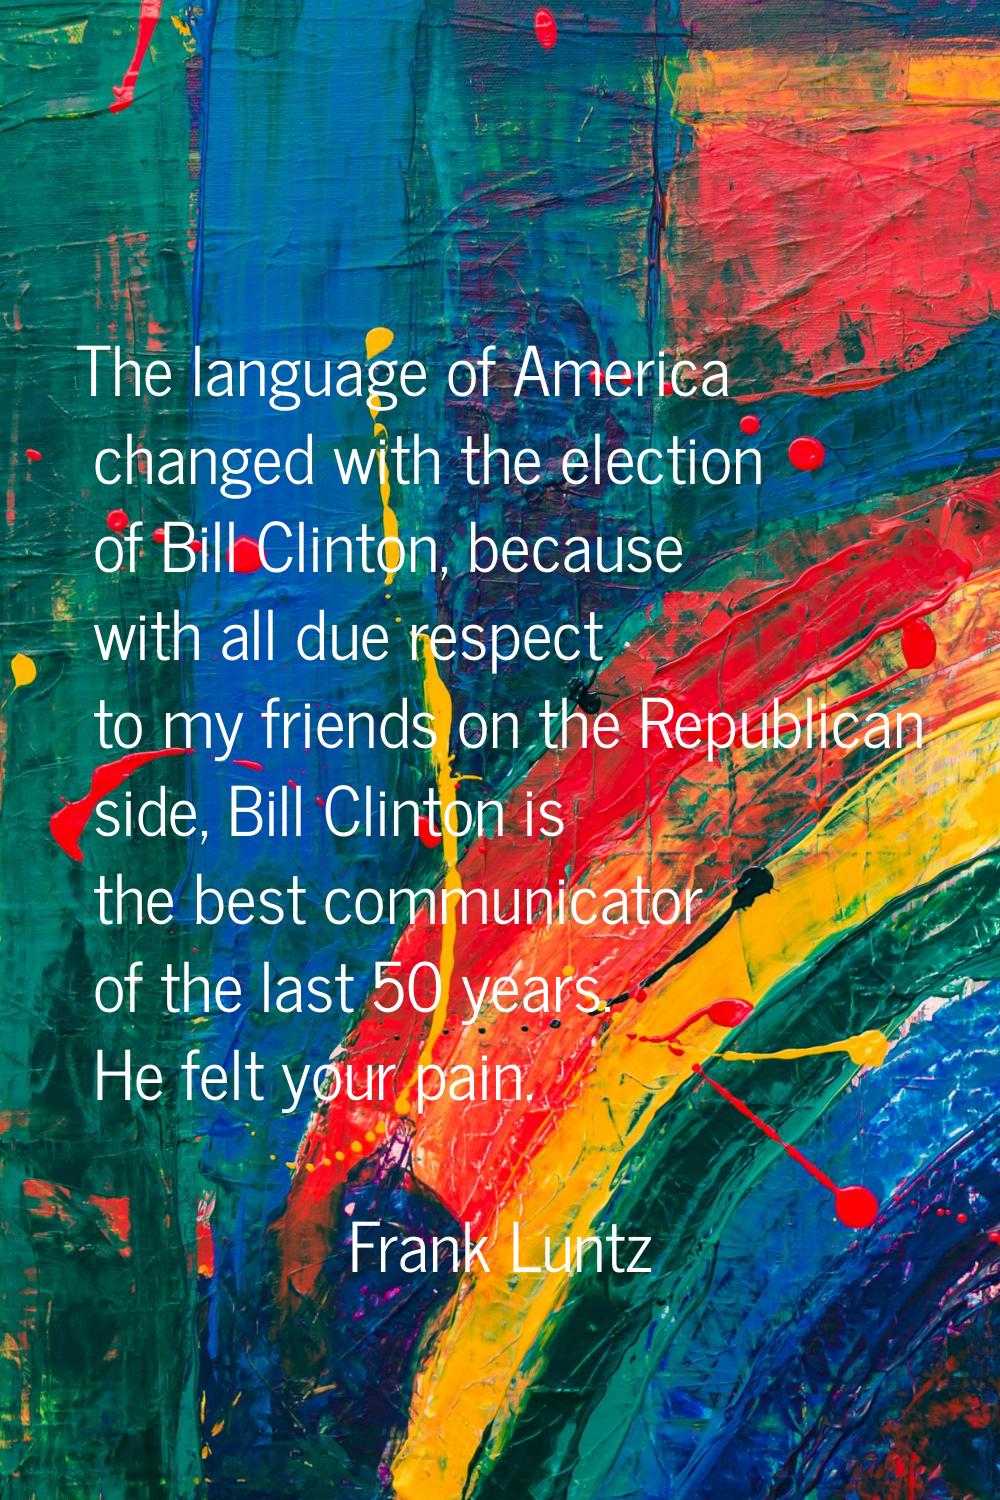 The language of America changed with the election of Bill Clinton, because with all due respect to 